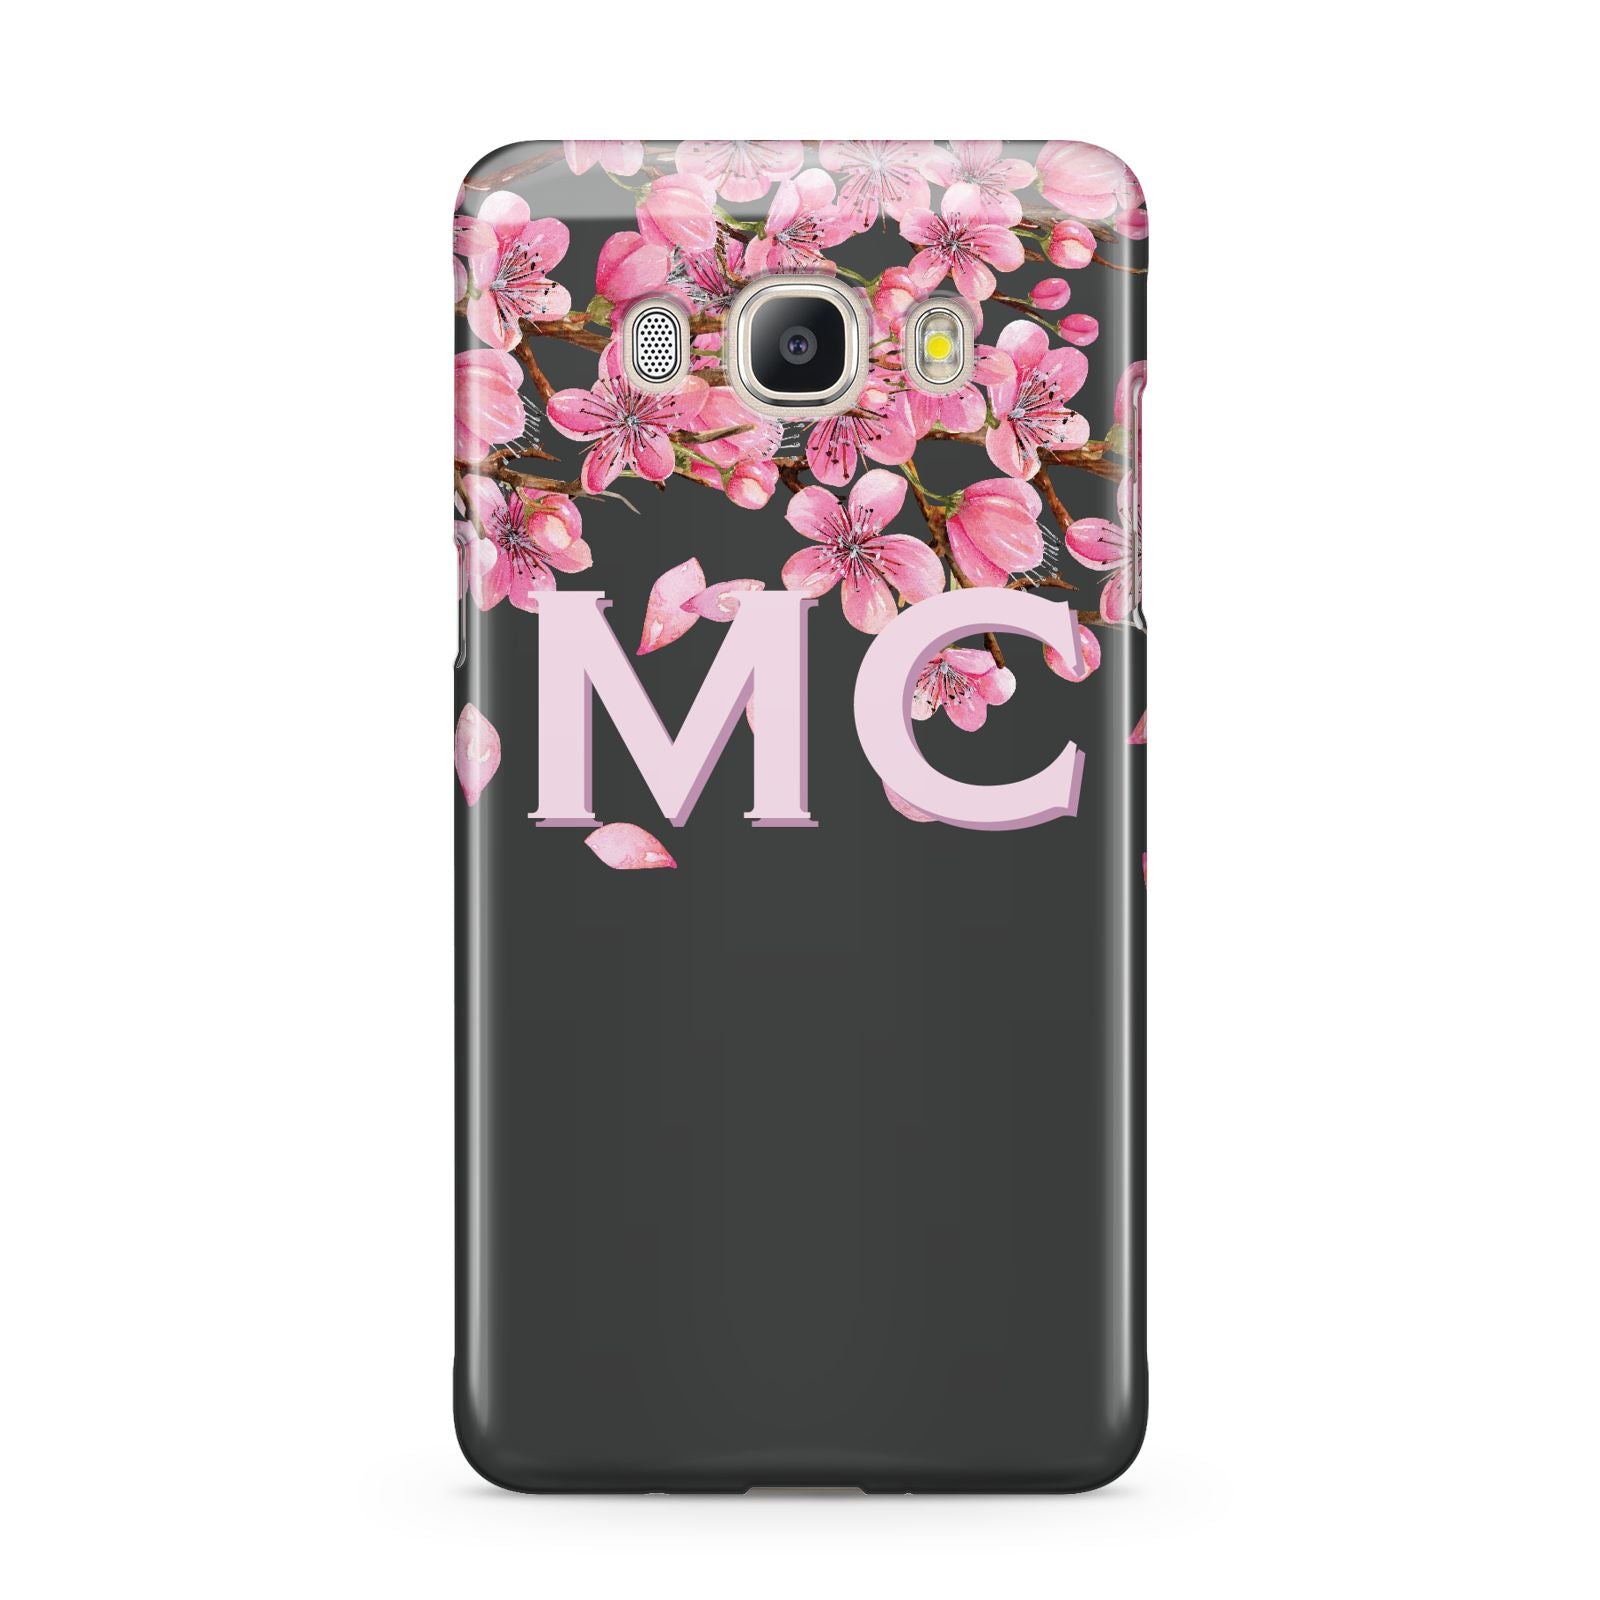 Personalised Floral Blossom Black Pink Samsung Galaxy J5 2016 Case